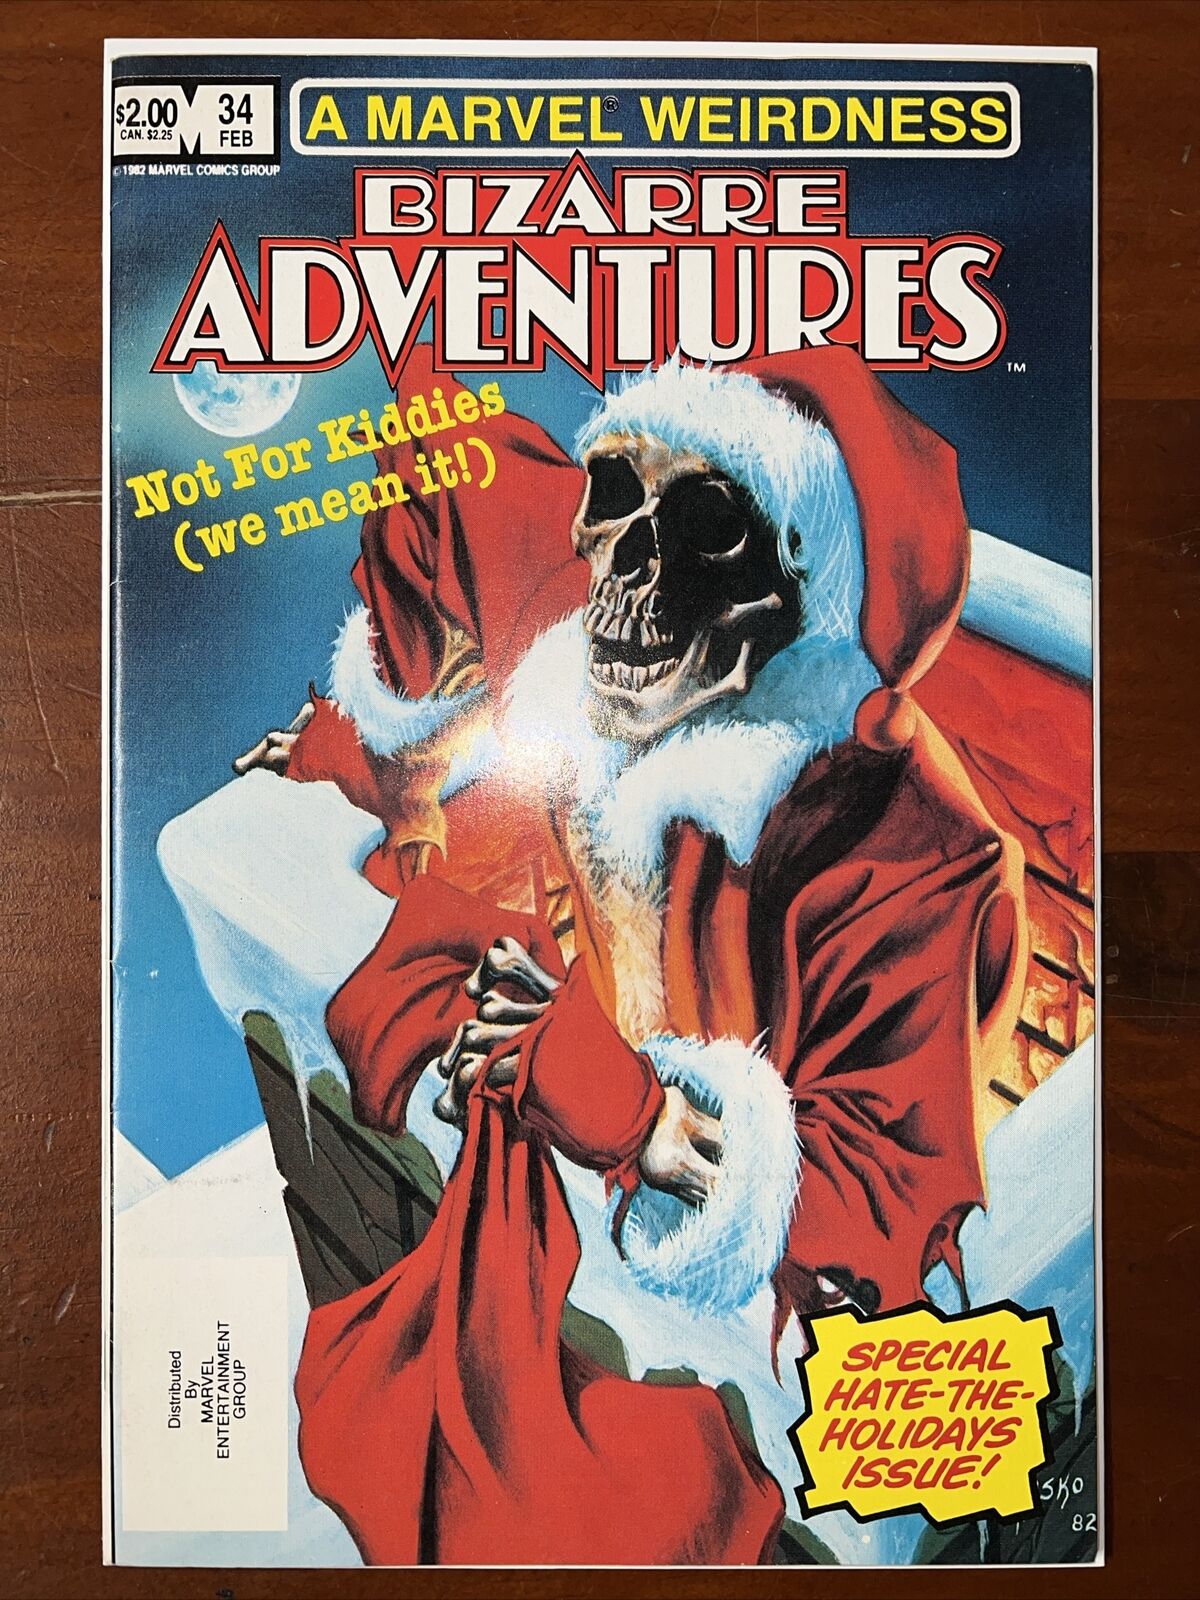 Bizarre Adventures #34 Holiday Final Issue of Series - Marvel, 1983 VF